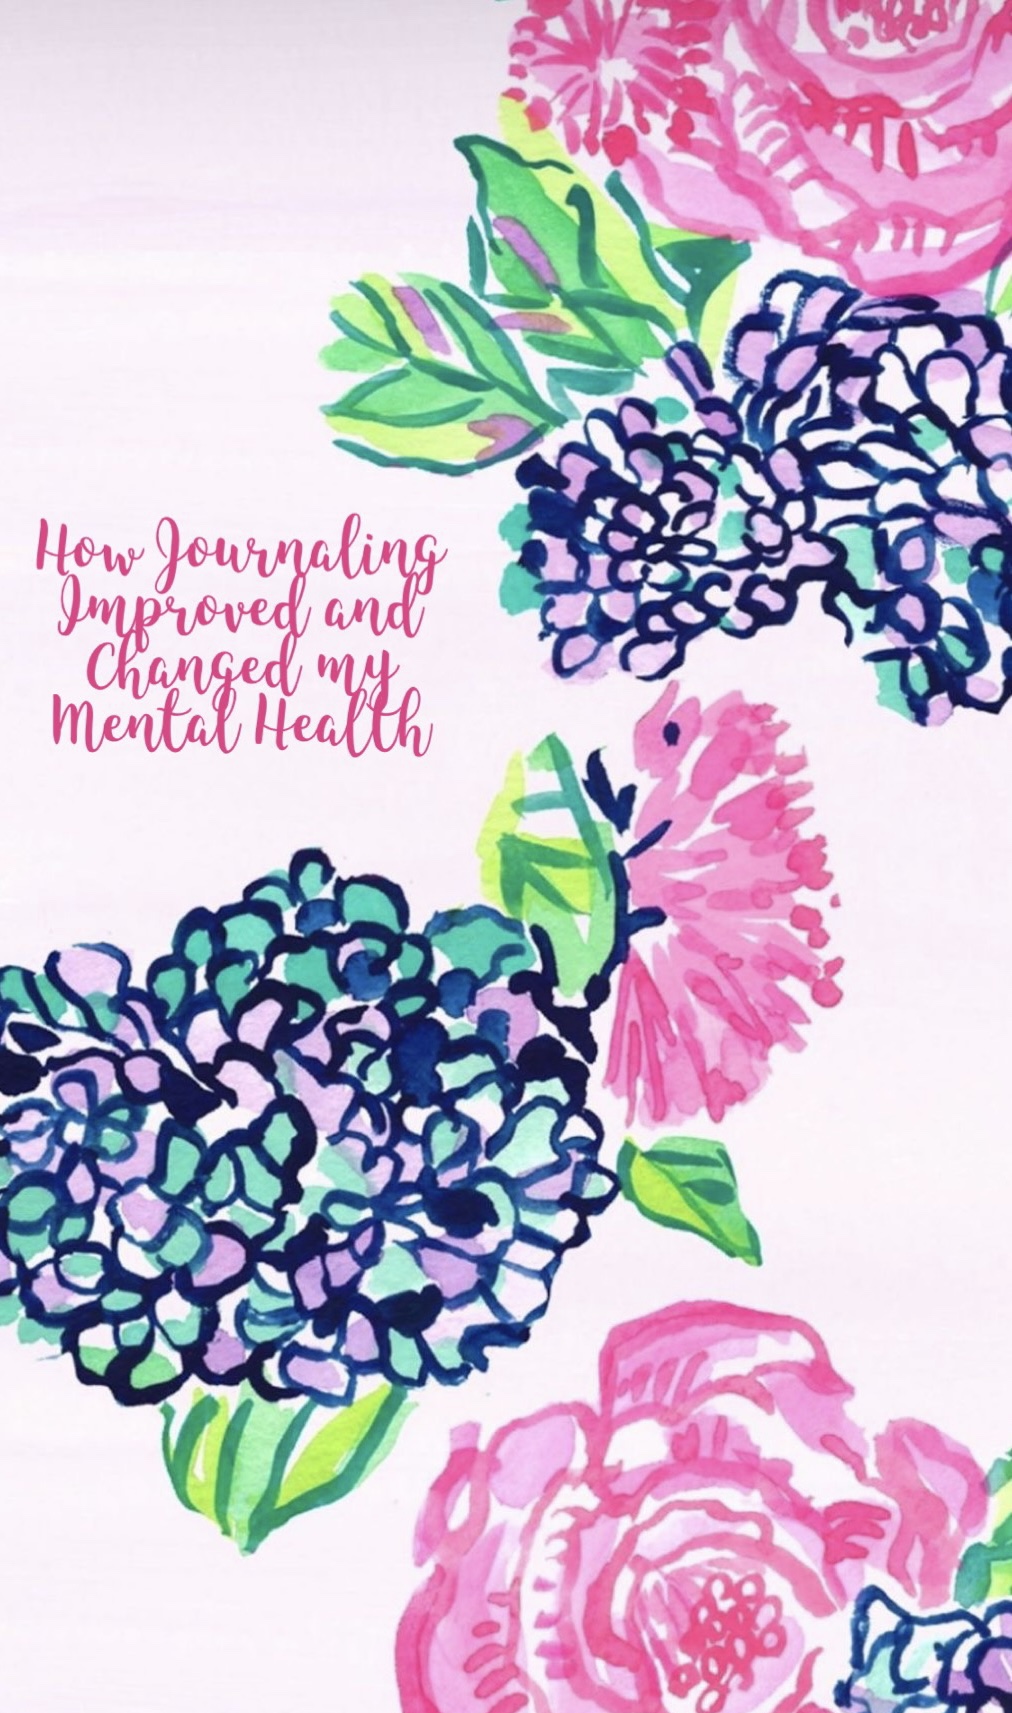 How Journaling Improved and Changed my Mental Health